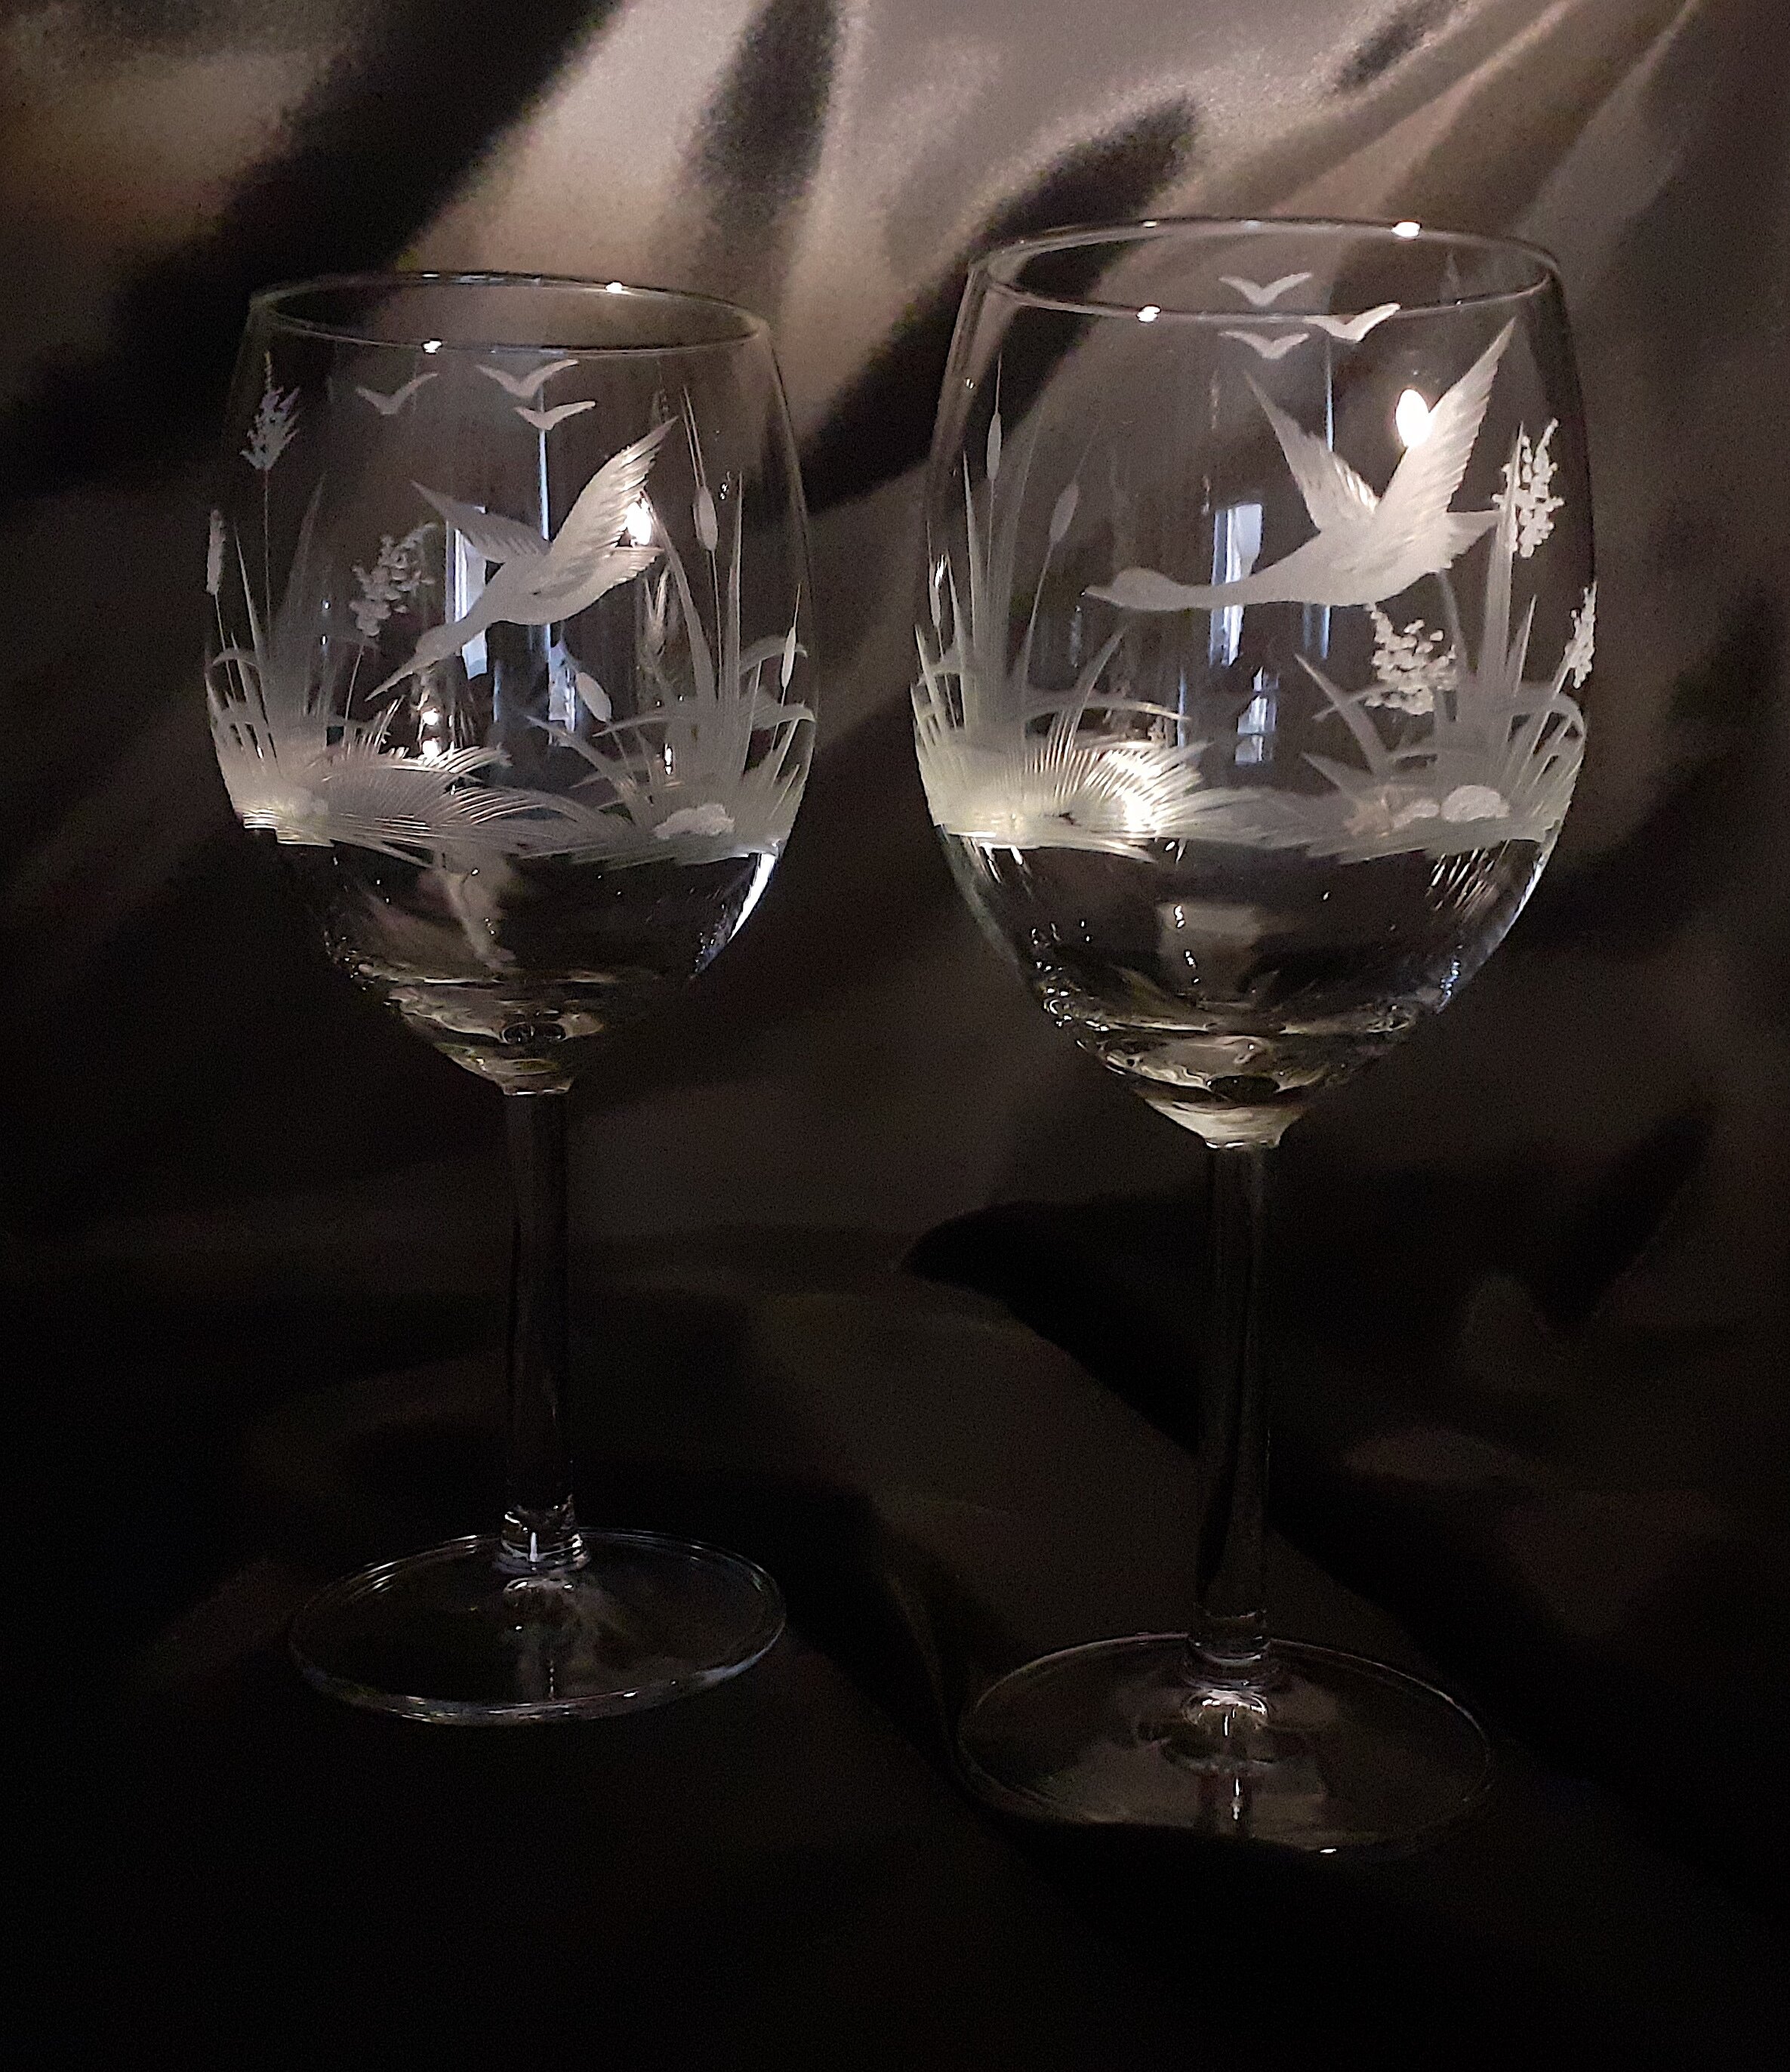 2 wine glasses hand engraved with different bird on each glass